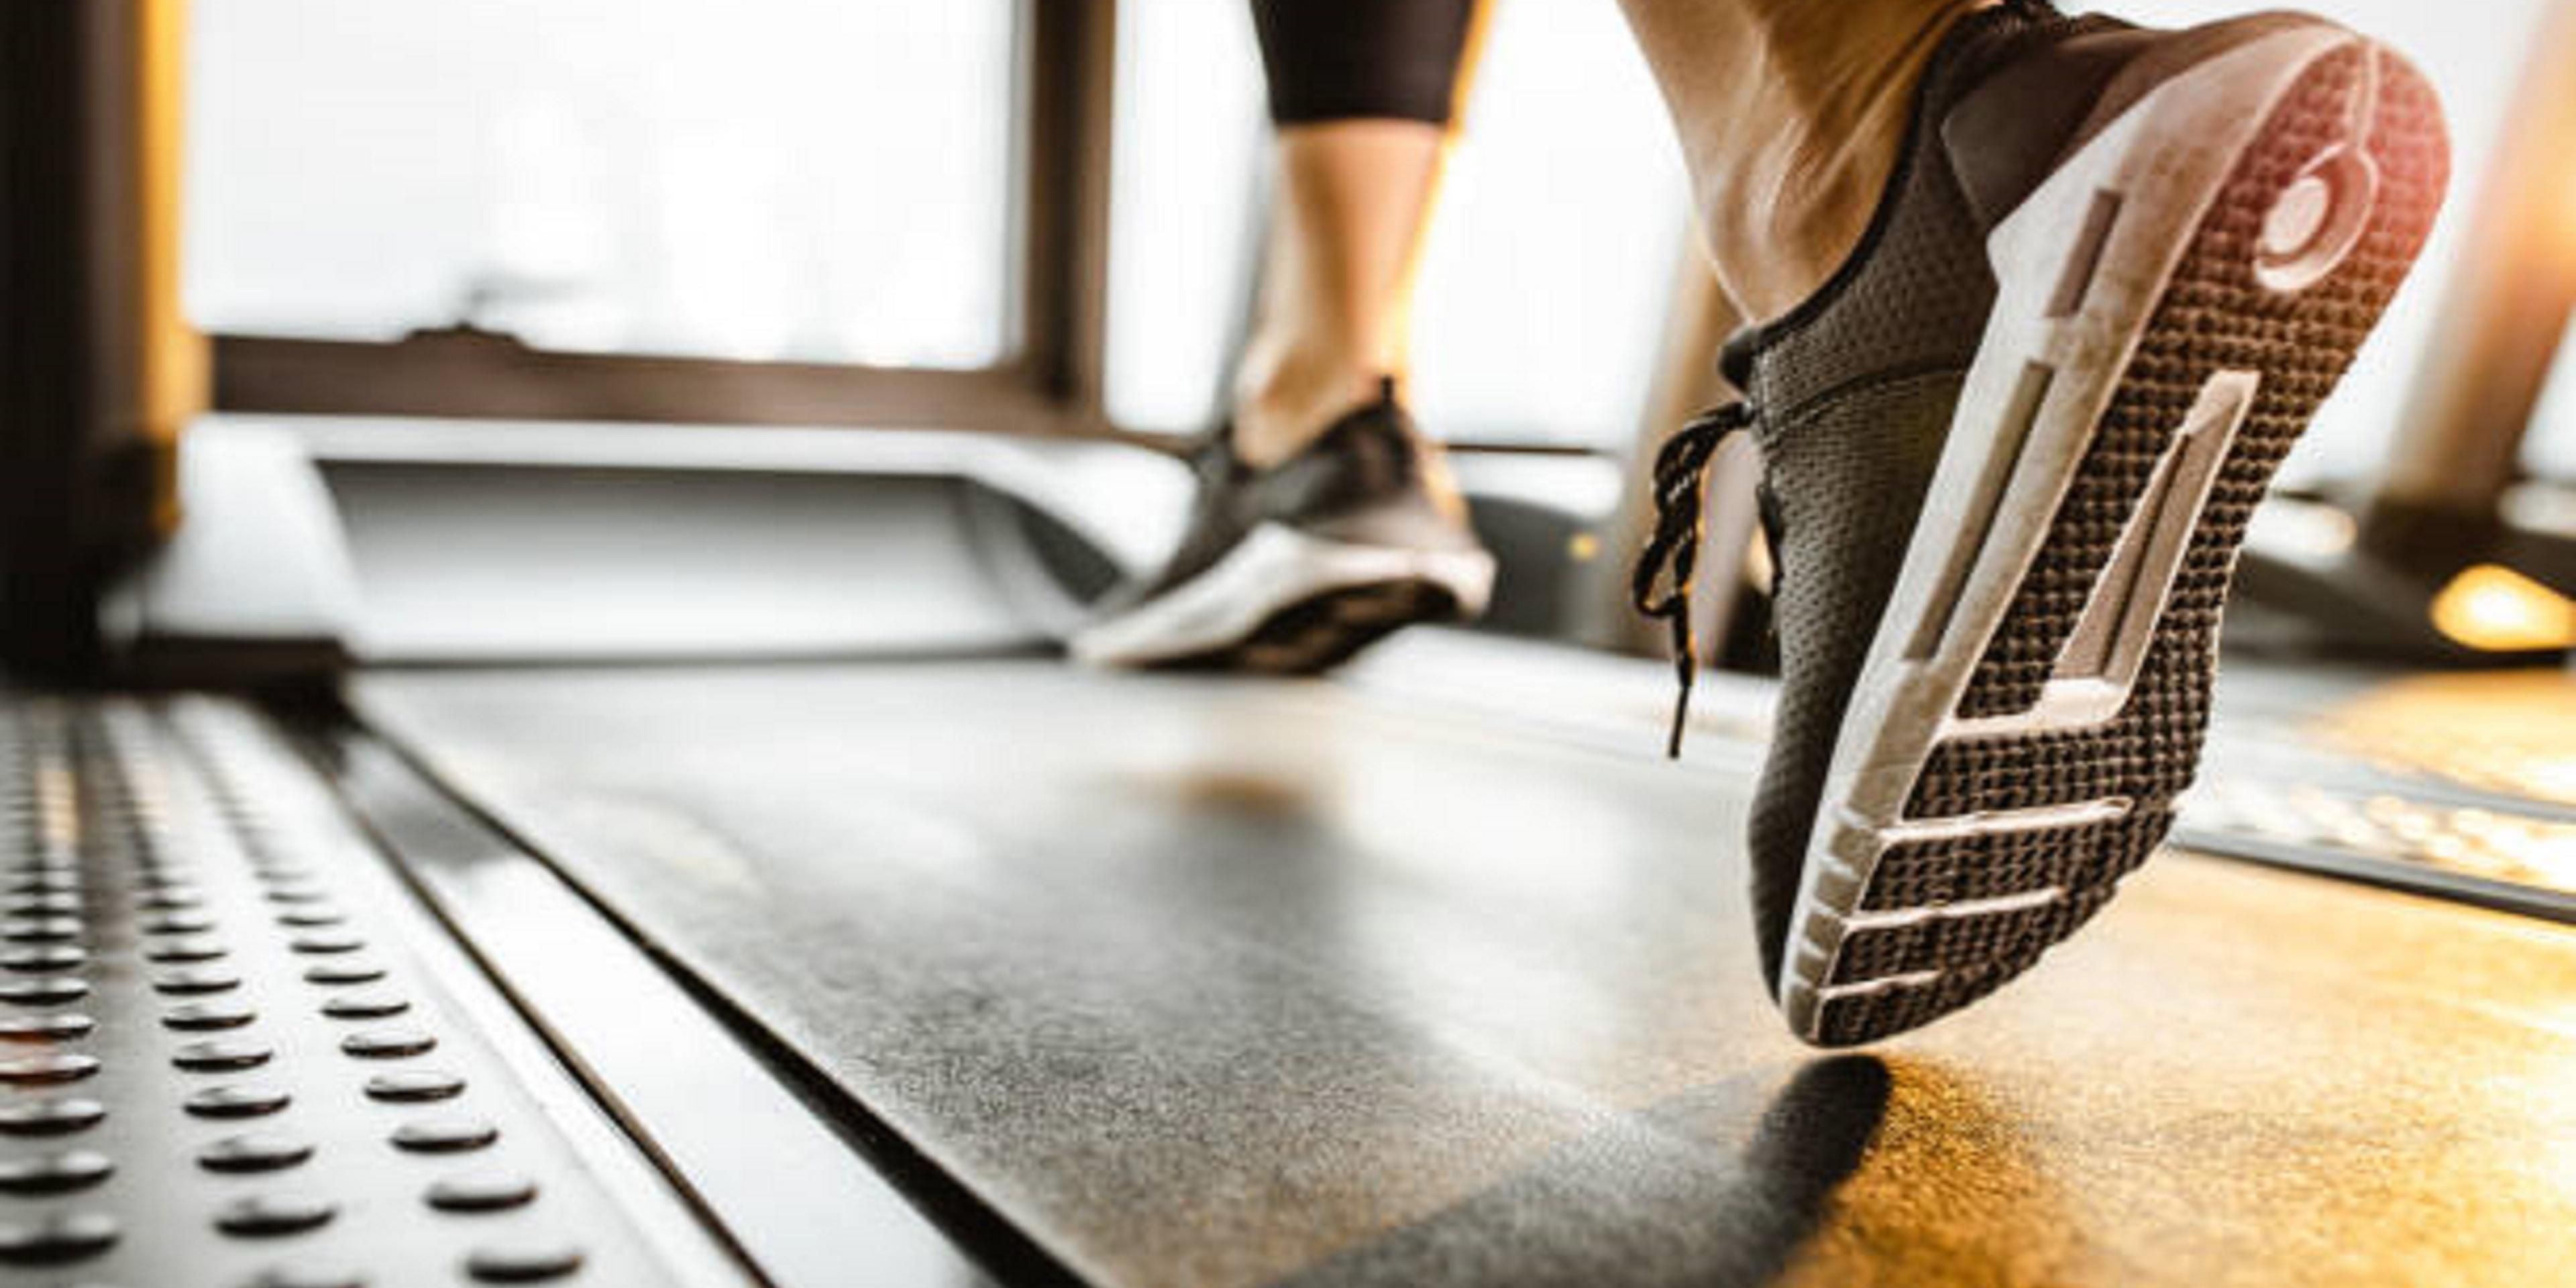 Get your sweat on in our complimentary, fully equipped Fitness Center with a Treadmill, Elliptical Machines, Free Weights, Yoga Balls, and Yoga Mats, open 24 hours. 